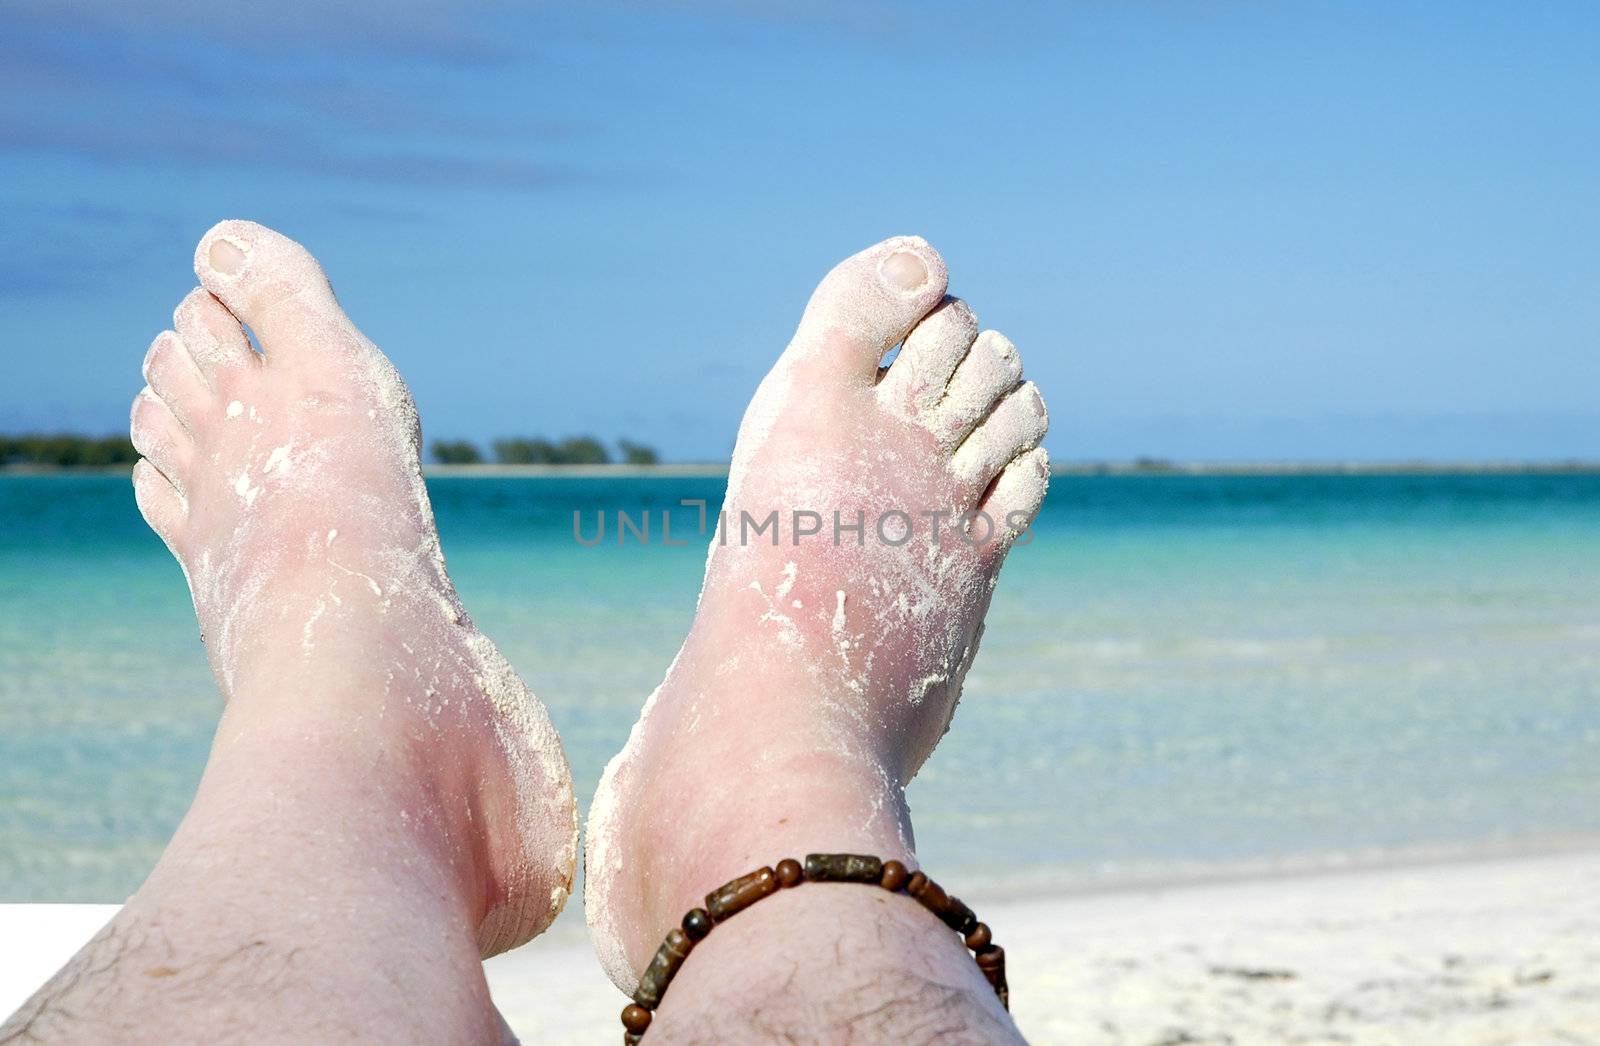 Bare feet covered in sand overlooking a blue sea.